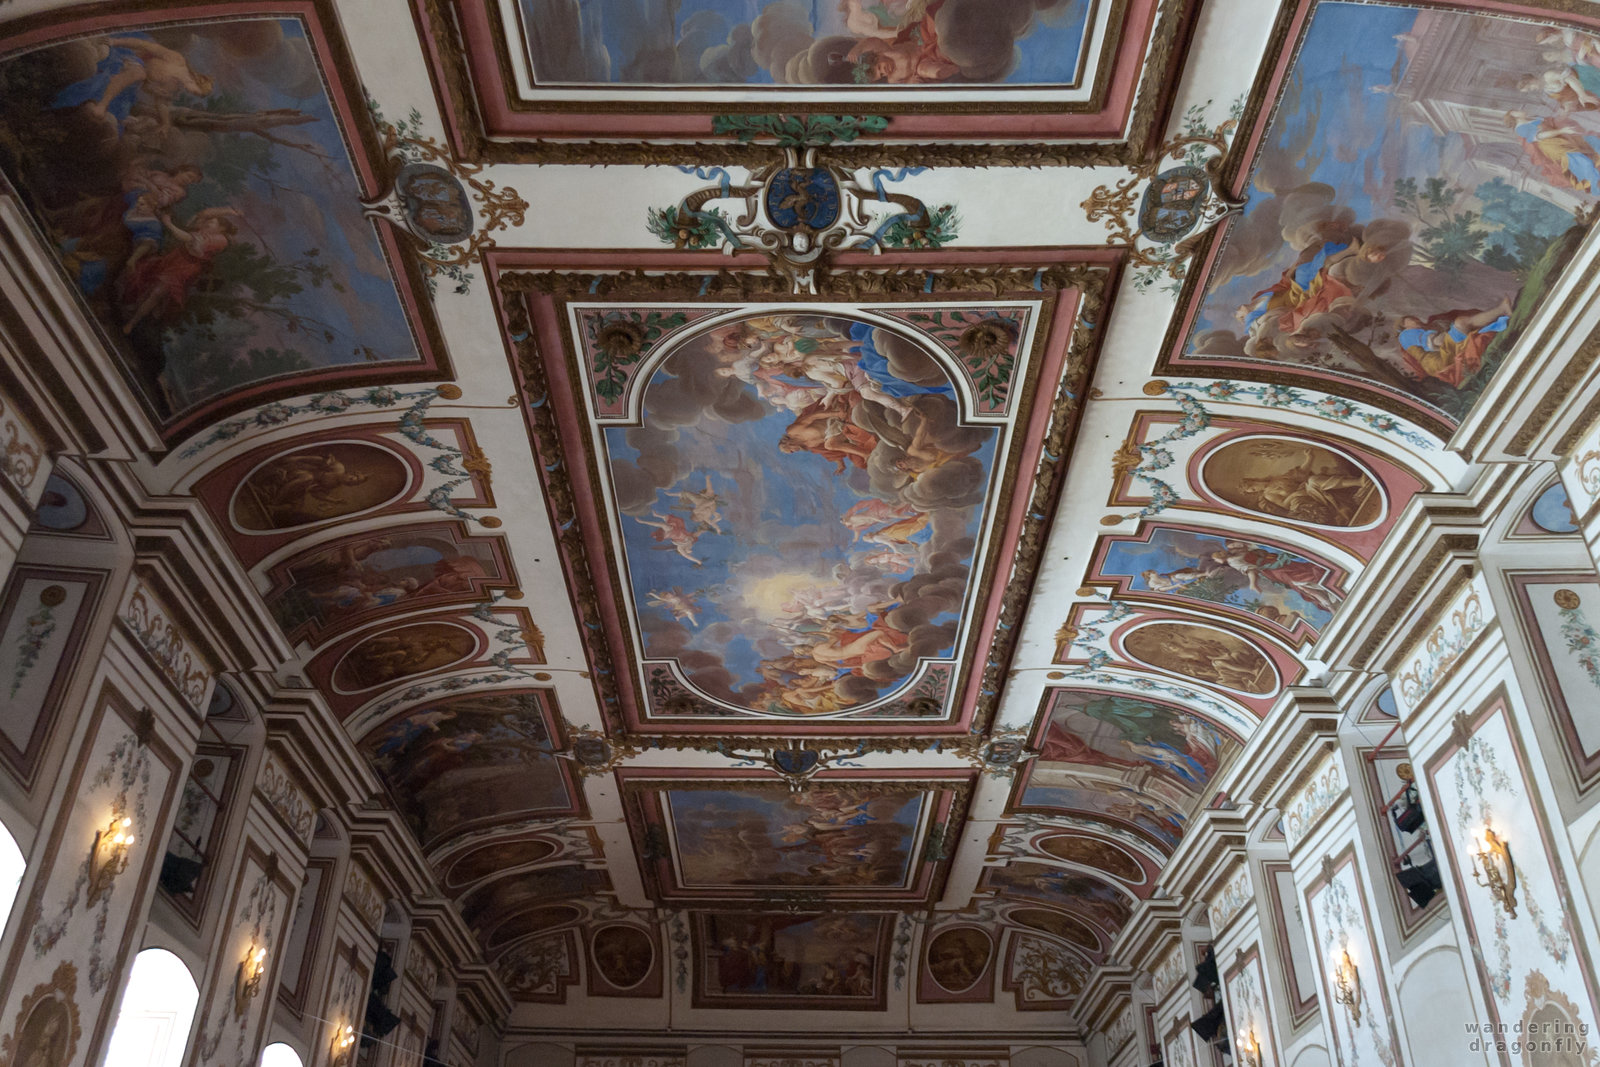 The amazing ceiling of the Haydn (concert) Hall -- ceiling, mural